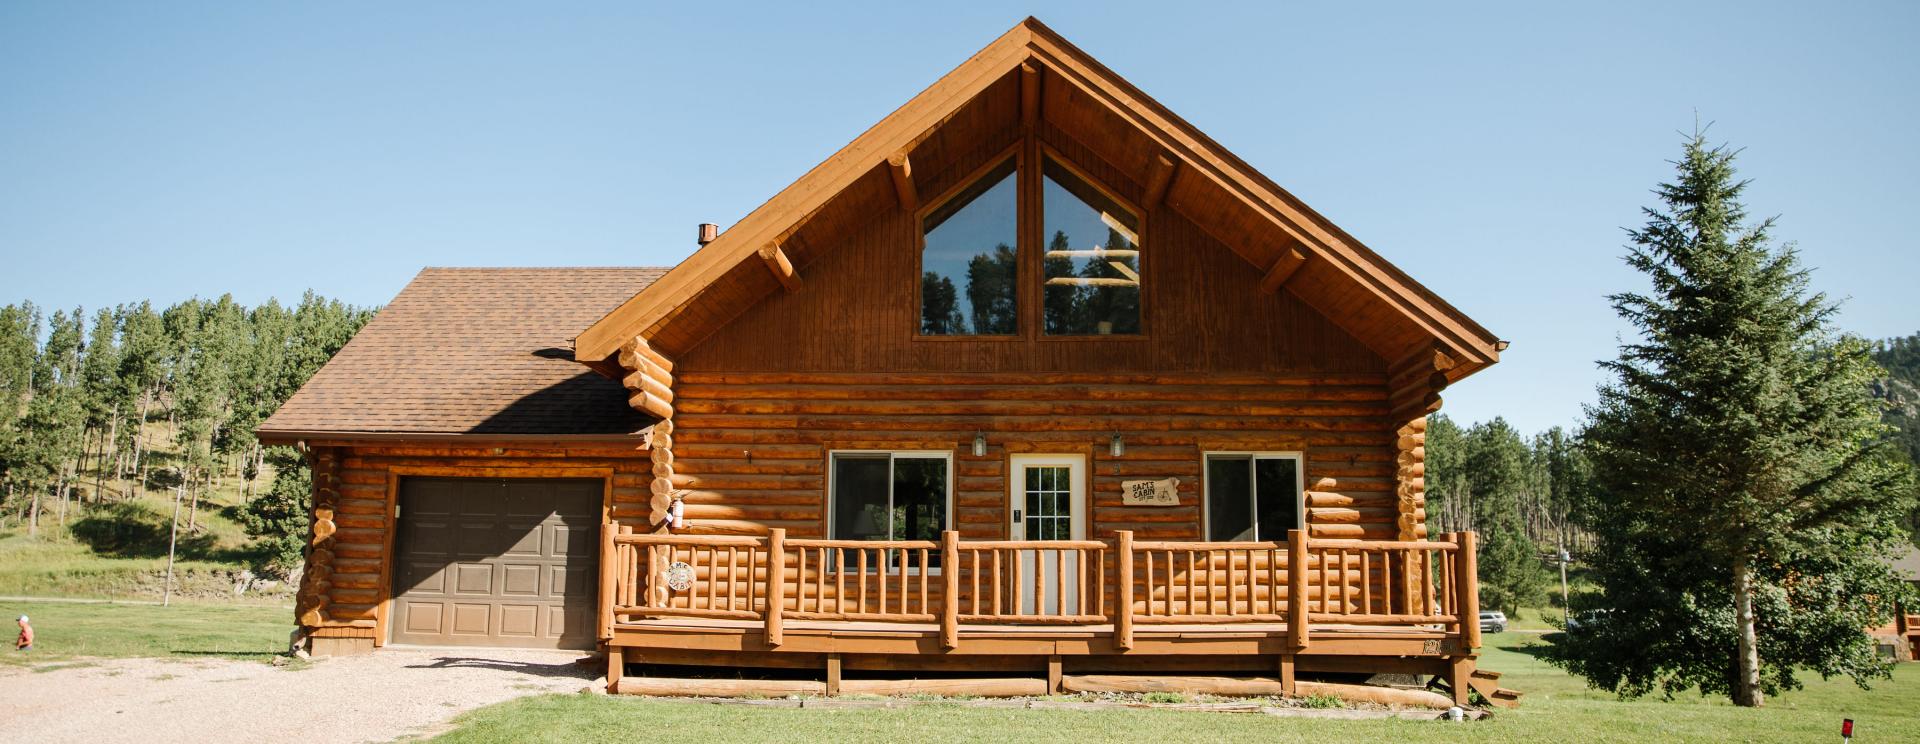 High Country Guest Ranch